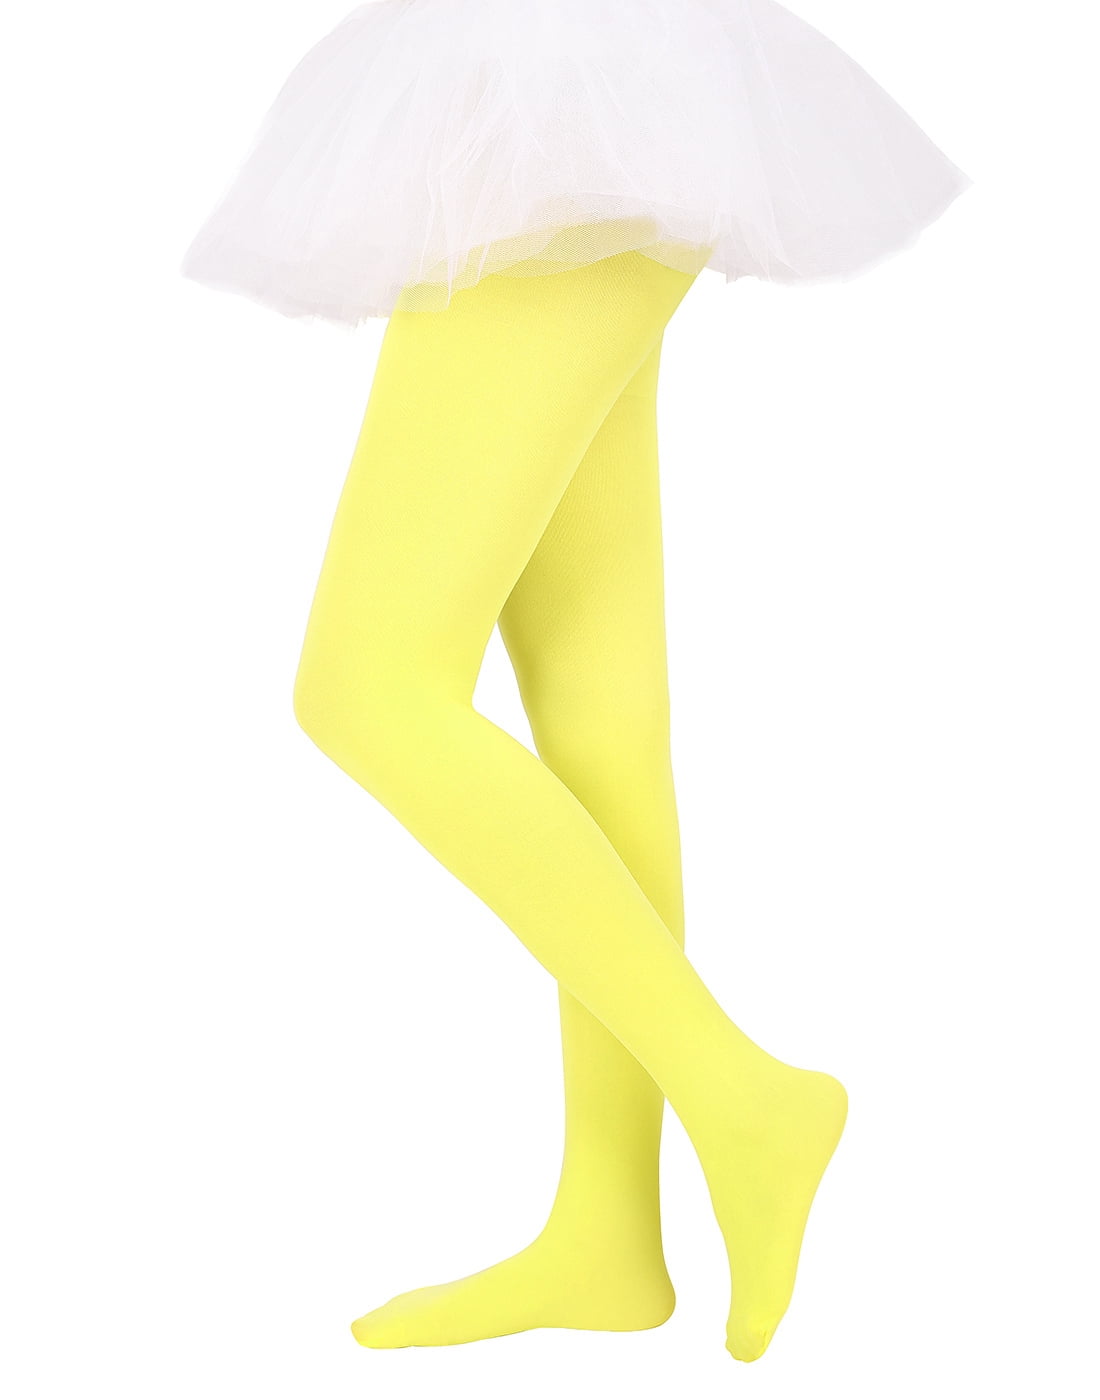 HDE Girl's Stockings Microfiber Opaque Footed Kids Tights (Yellow, Medium)